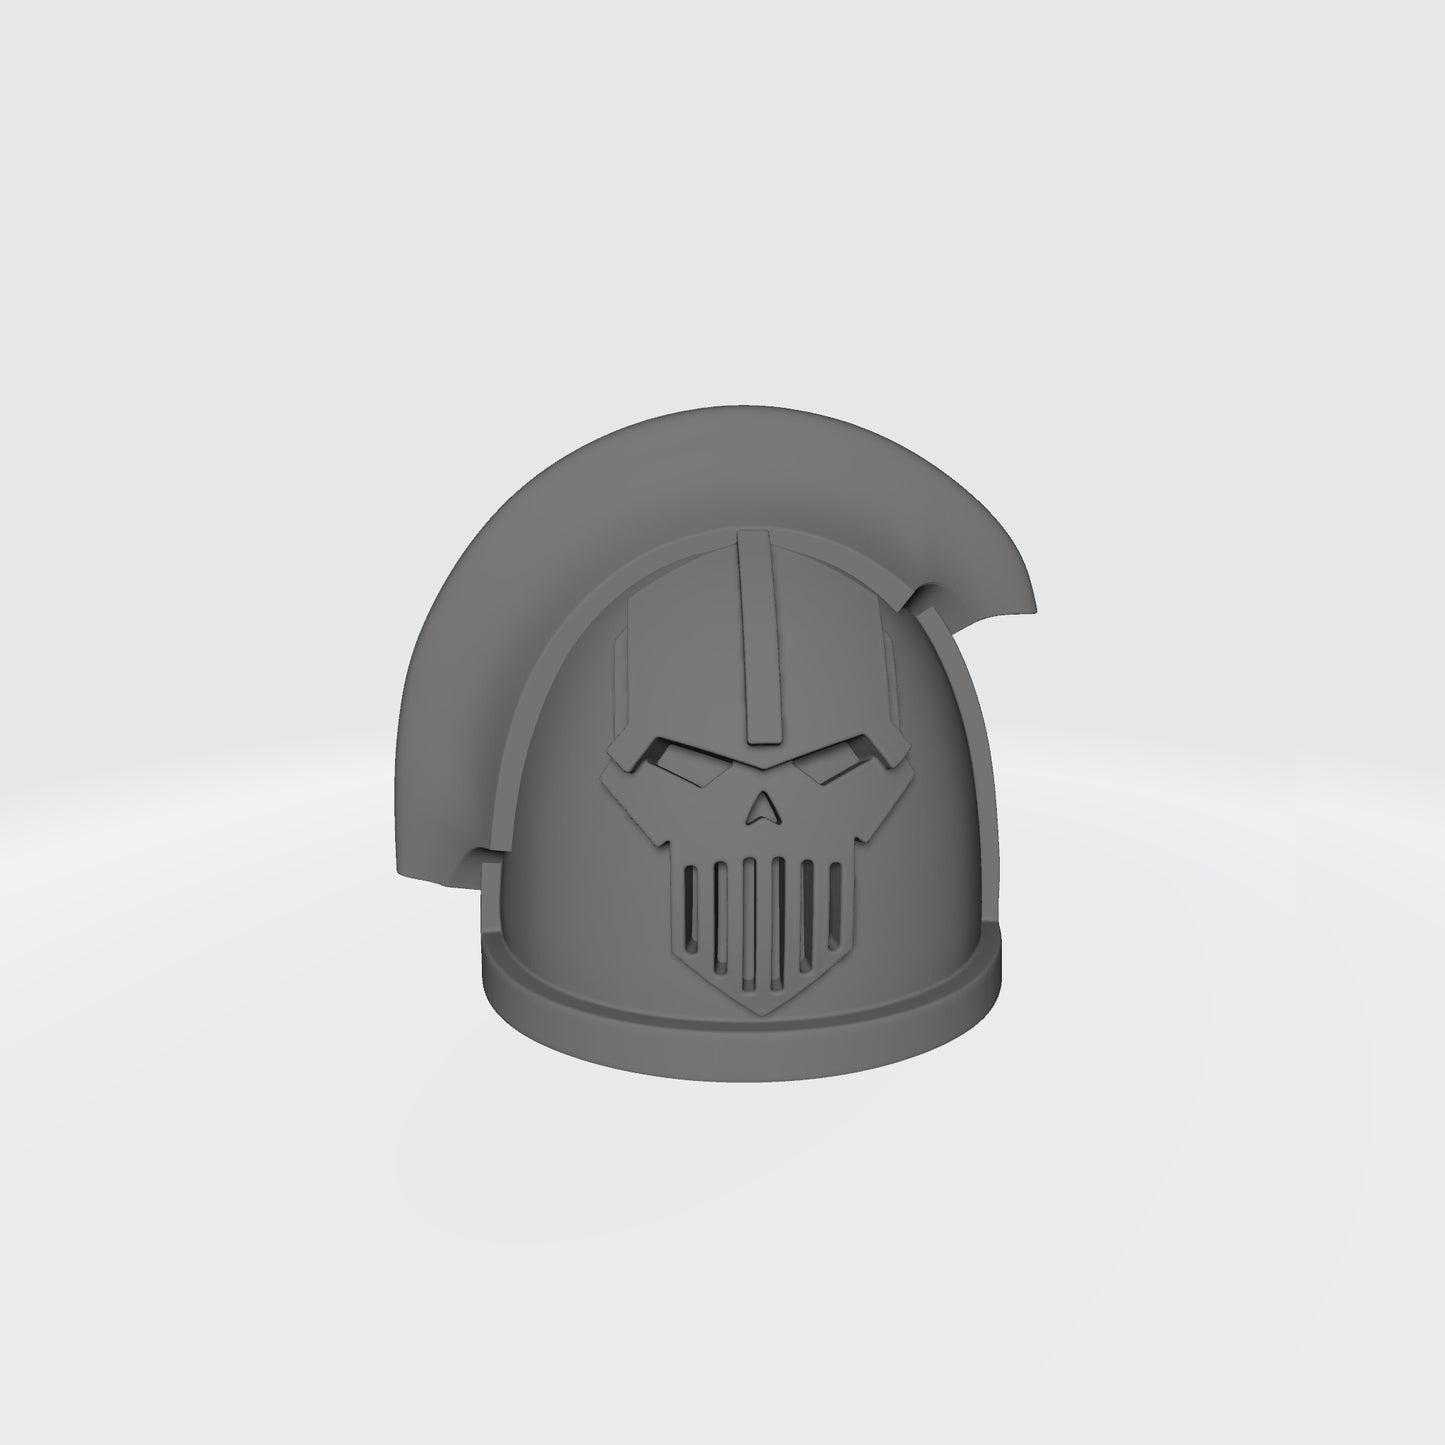 Custom Iron Warriors MKIII Shoulder Pad with 3 Quarter Ridge for the Left Shoulder Compatible with McFarlane Toys 1:12th Scale Space Marine Action Figures